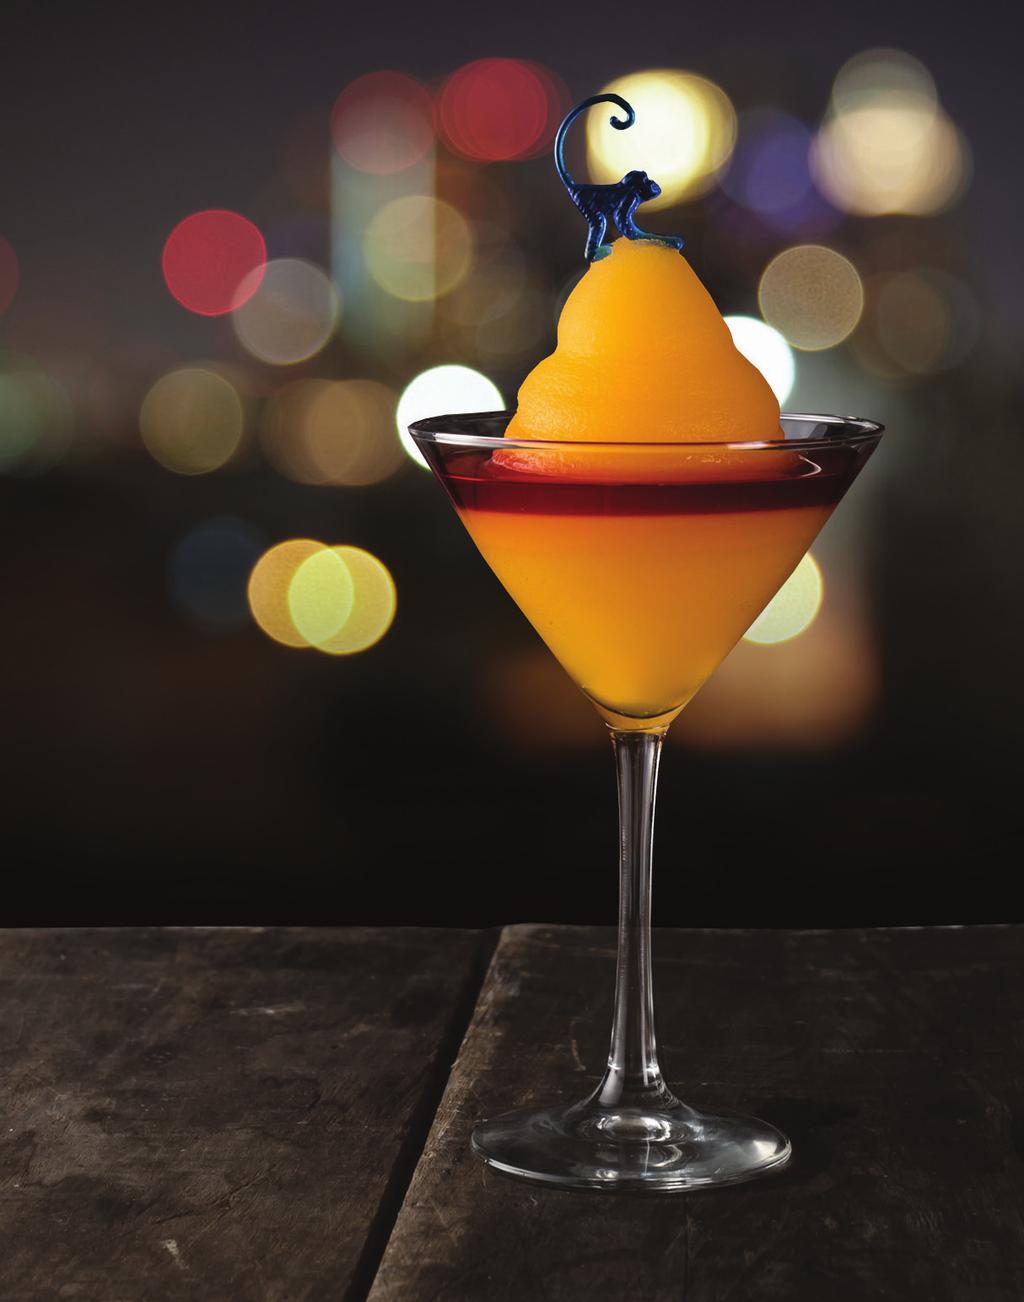 The Bellini was invented in 1934 by Giuseppe Cipriani, founder of Harry s Bar in Venice, Italy.